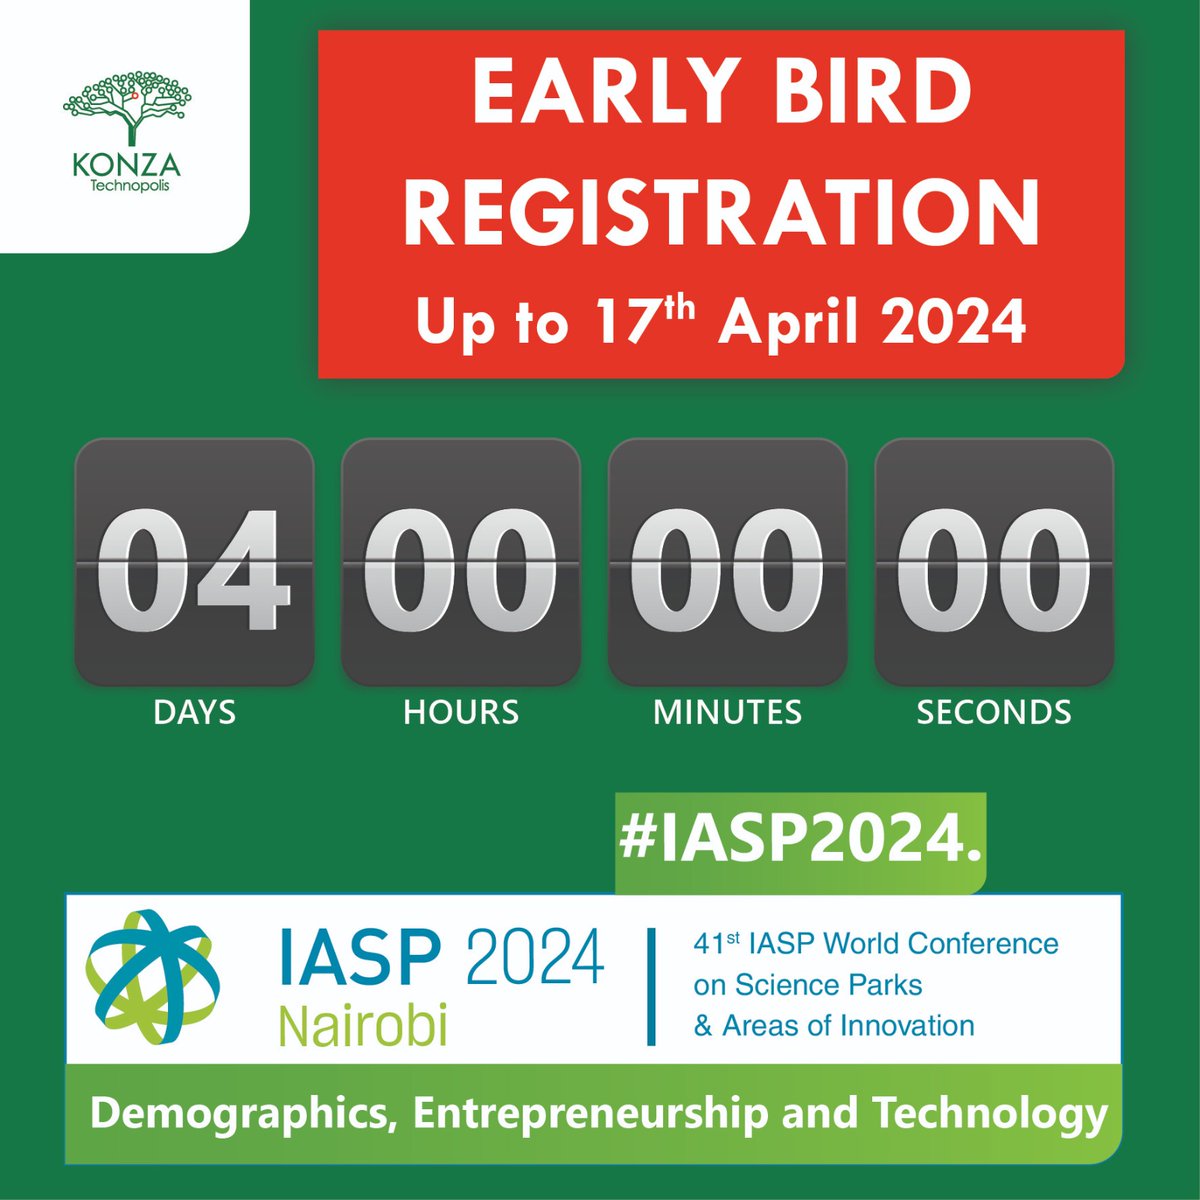 T-4 days to go till the deadline for #IASP2024 early bird registration.

Take this opportunity and register here iaspworldconference.com before the deadline catches up with you.

#KonzaTechnopolis #SmartCity  #SiliconSavannah #LetsGoToKenya